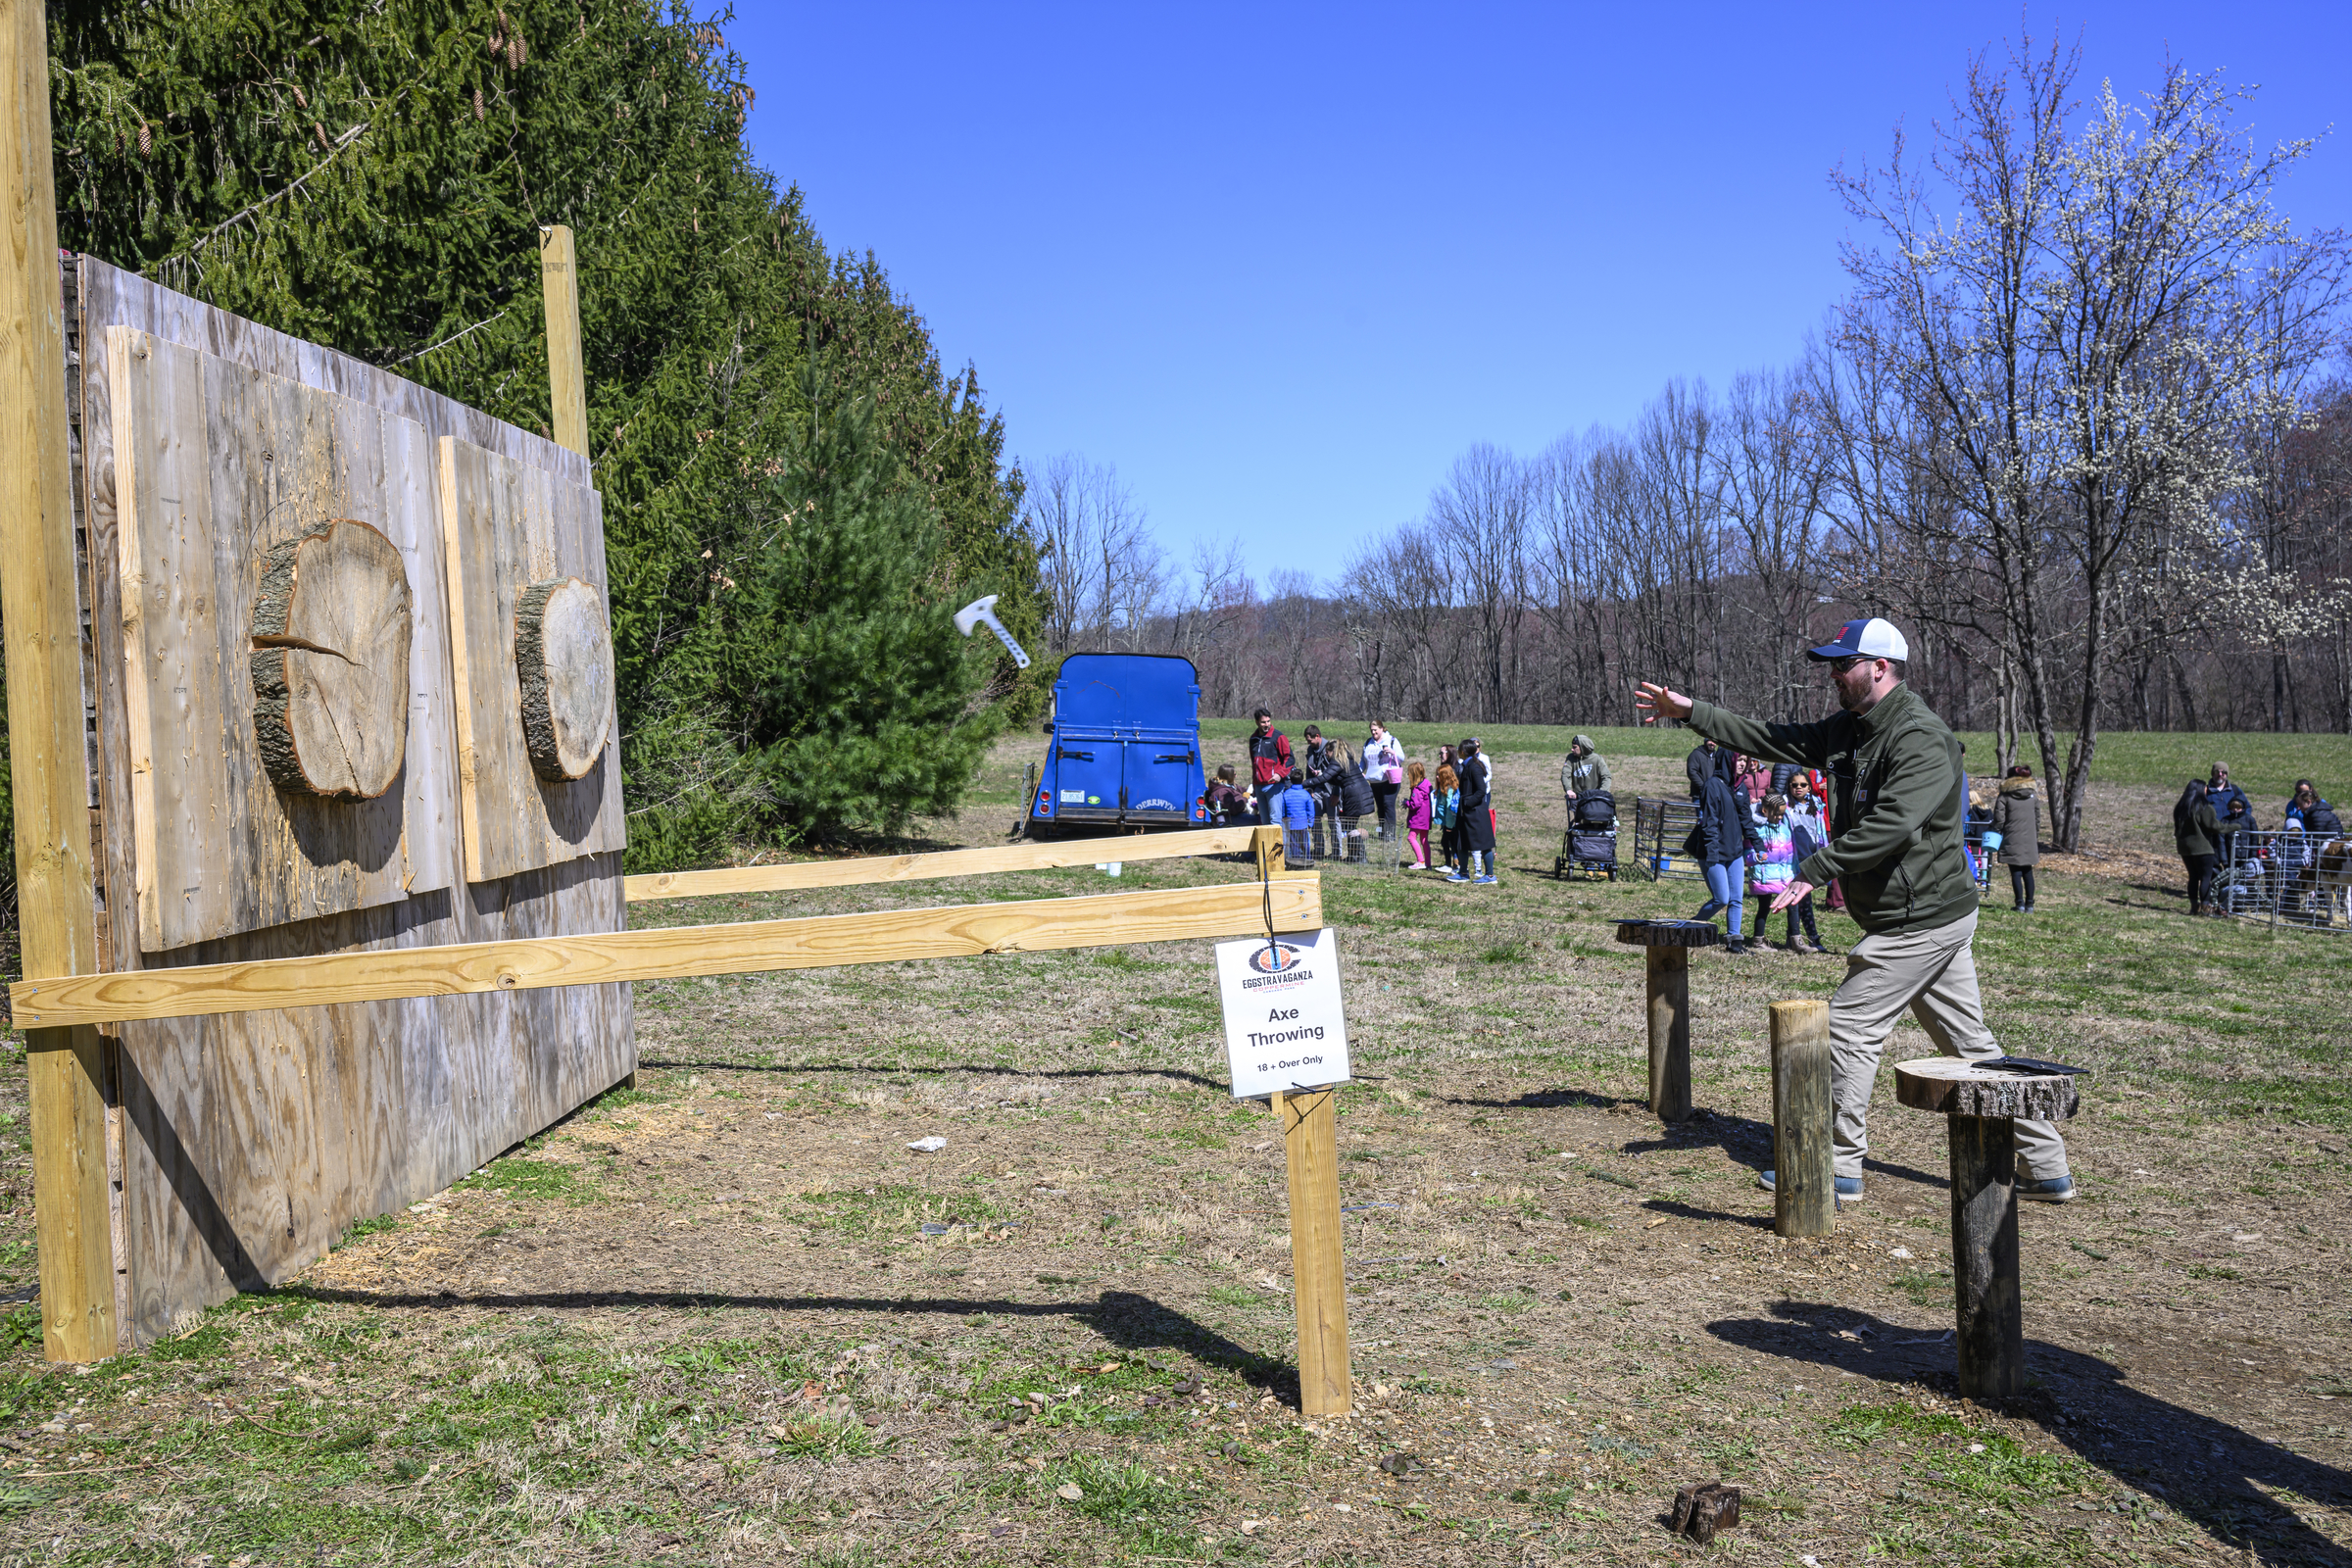 Gunner Cullison gives axe throwing a try during the Coppermine Eggstravaganza at Cascade Park in Hampstead. (Thomas Walker/Freelance)